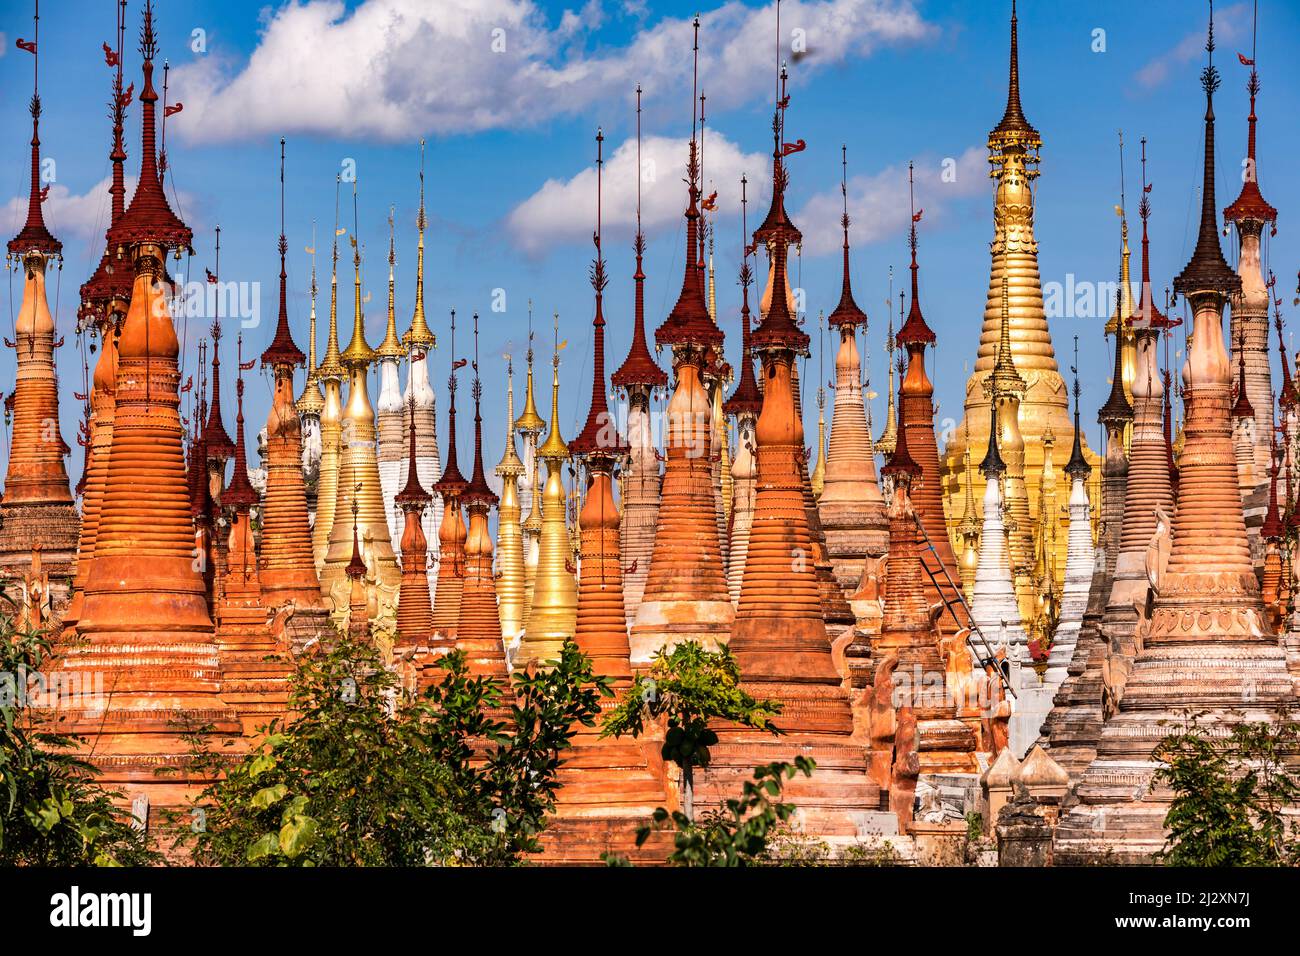 A multitude of grave stupas standing close together in the pagoda forest of In-Dein on Inle Lake in Myanmar Stock Photo